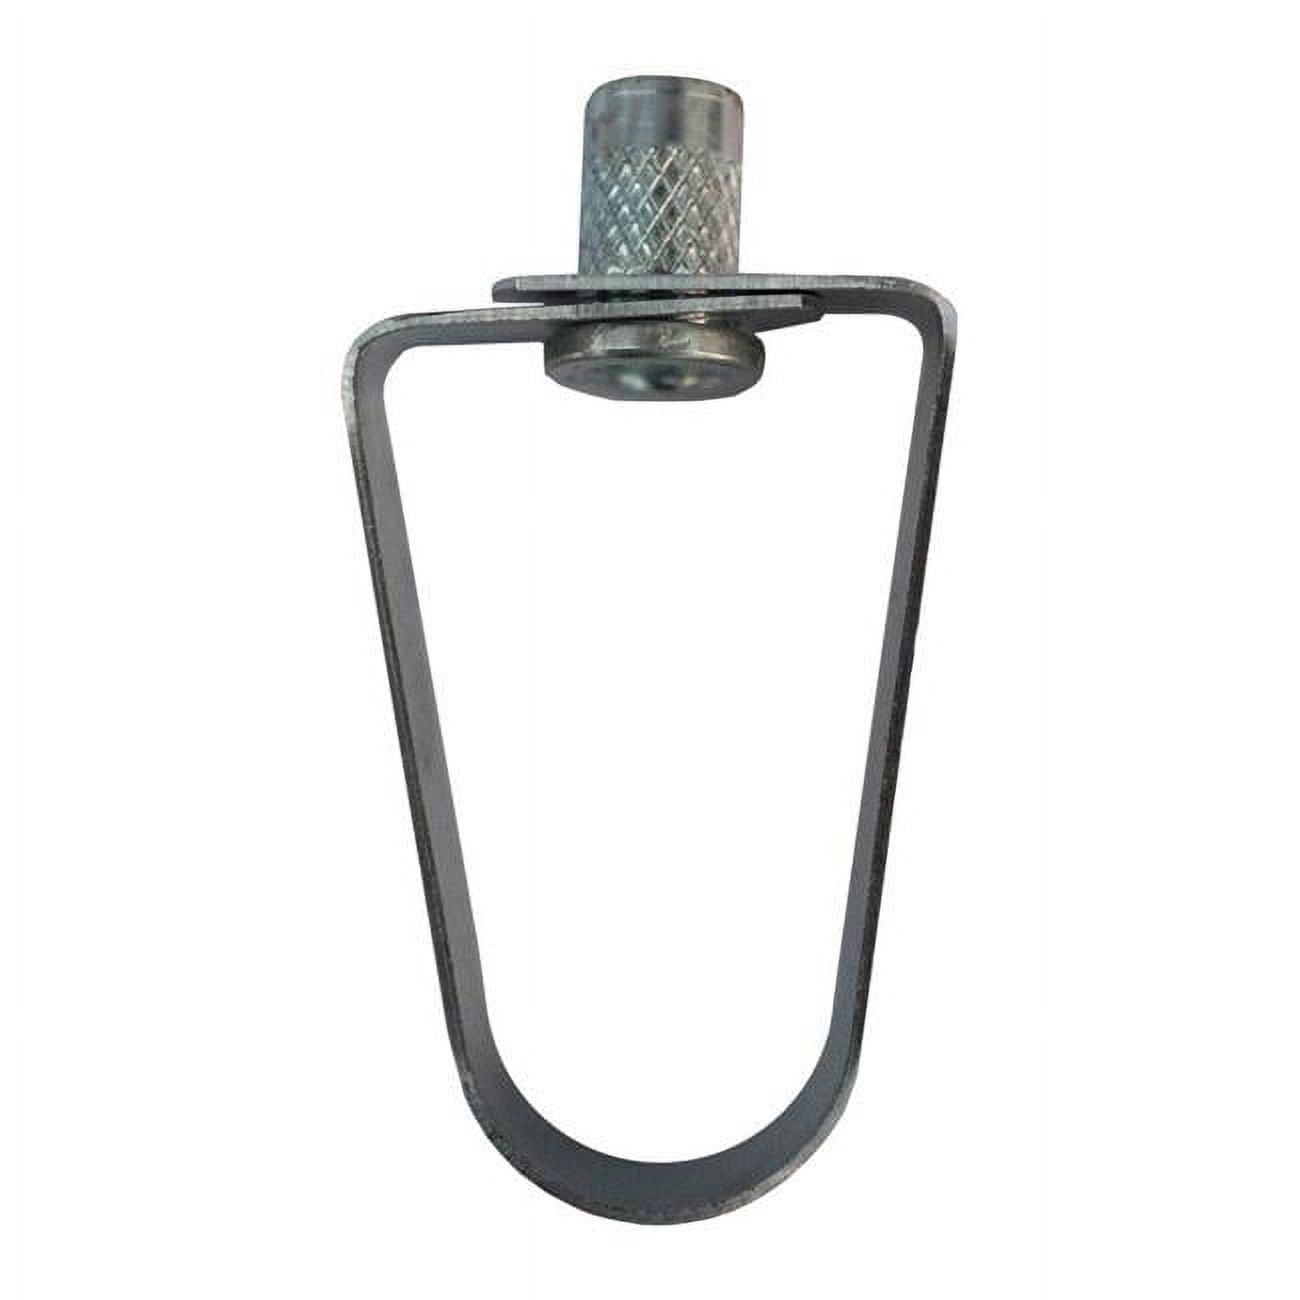 Picture of Warwick Hanger 3861234 Carbon Steel Pipe Hanger - Galvanized, Pack of 25